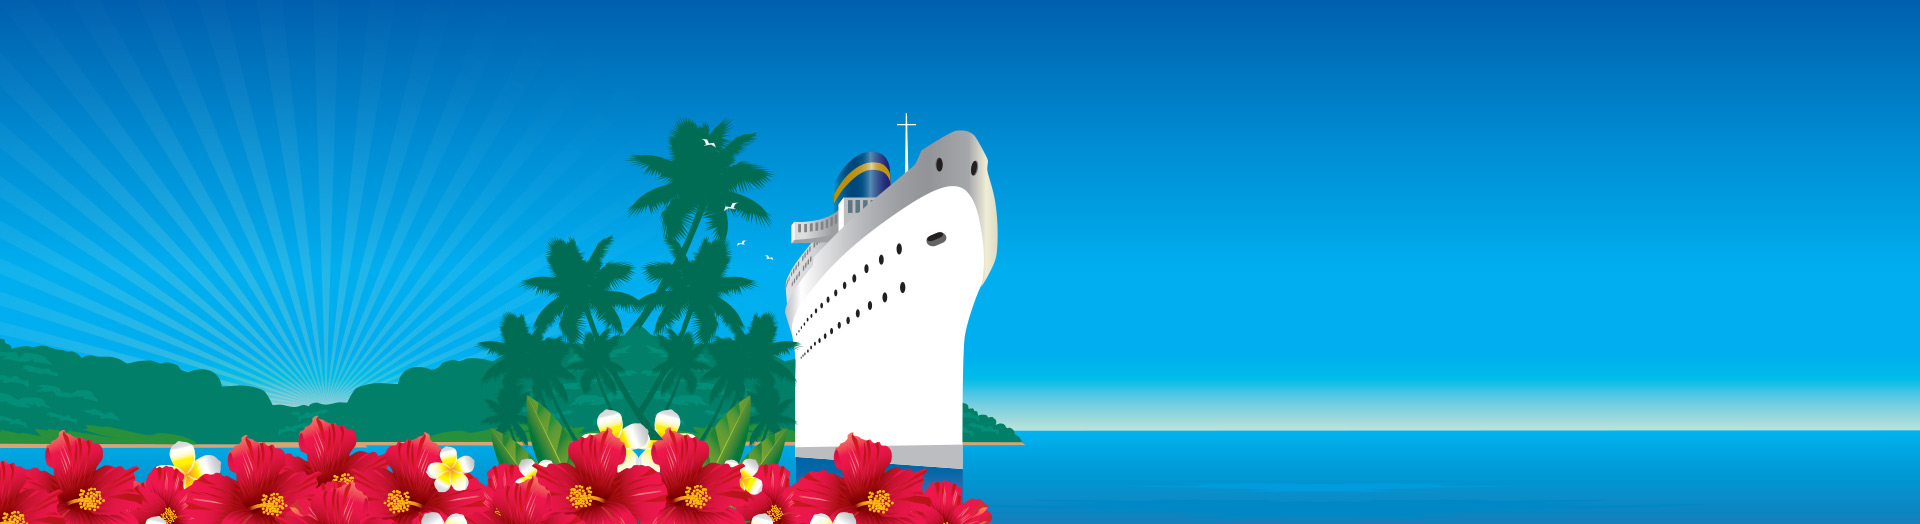 cruise-offers-tour-booking.jpg